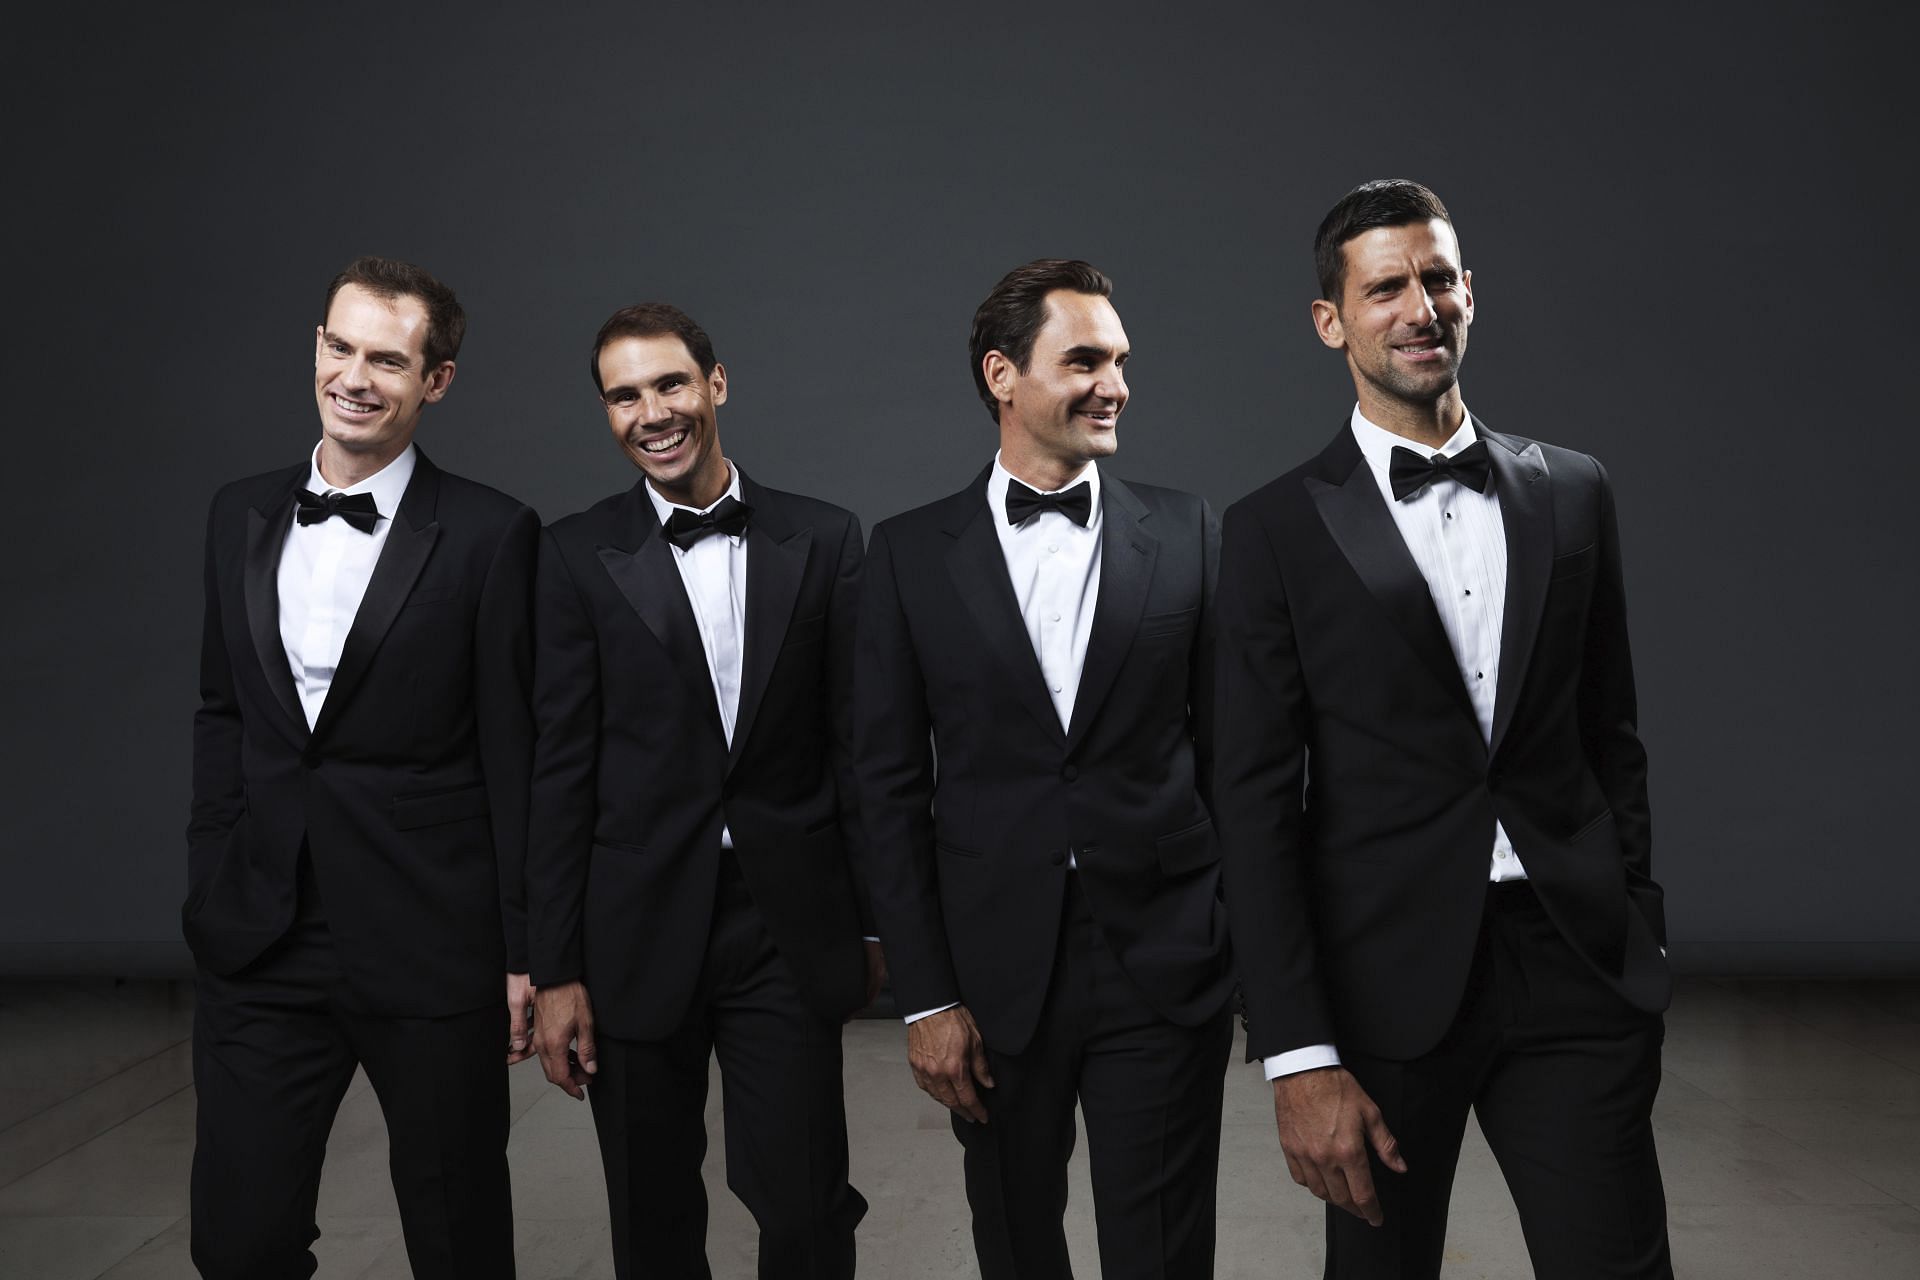 The Big 4 at the Laver Cup 2022 